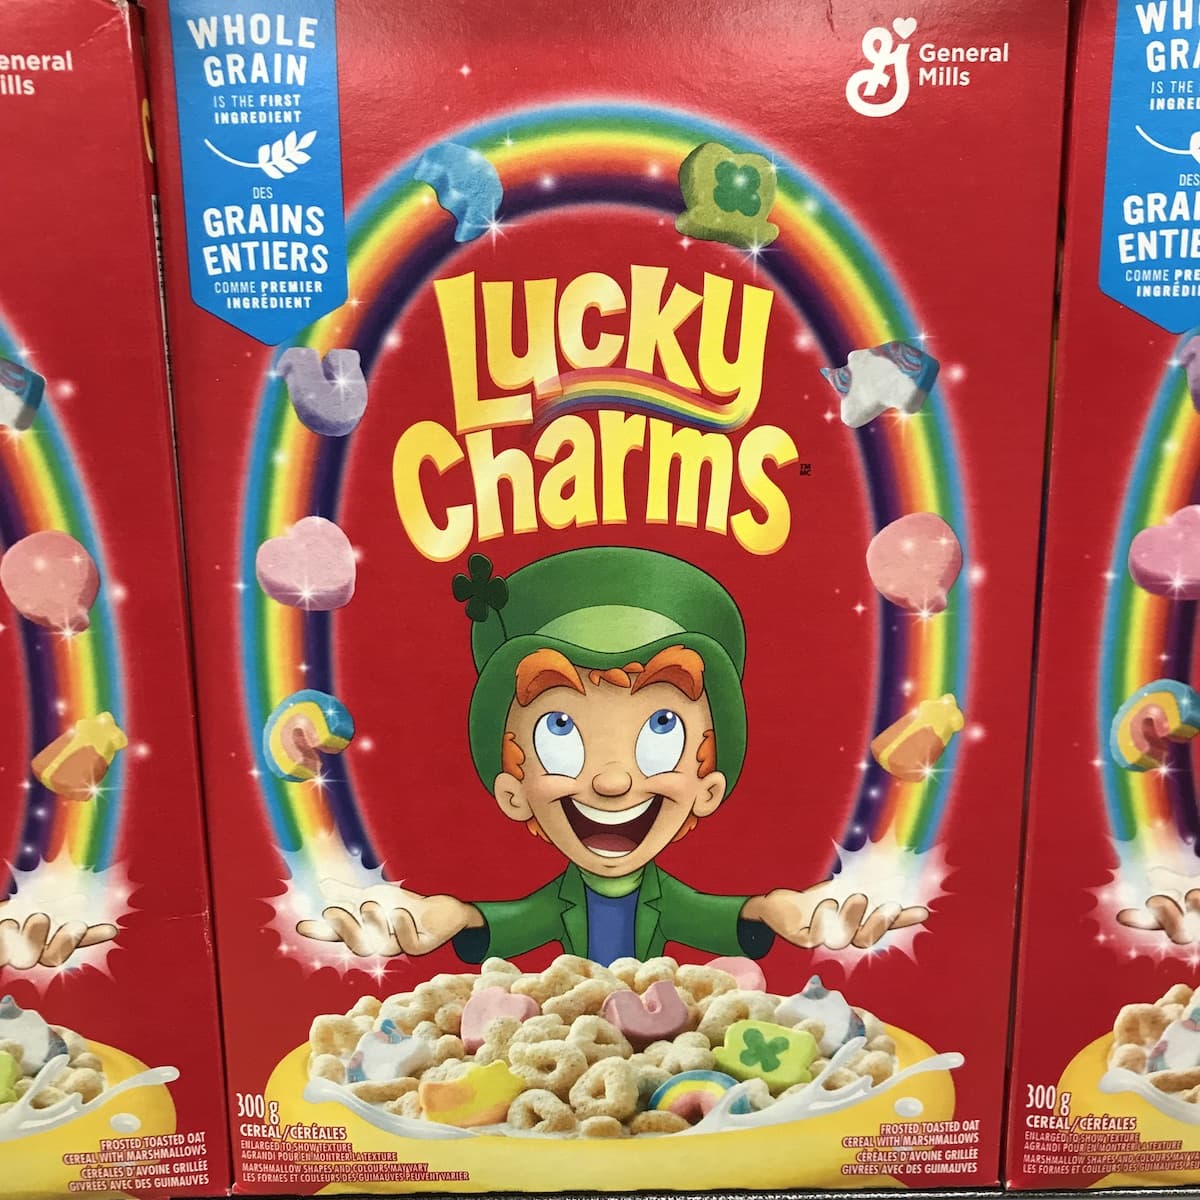 A red box of Lucky Charms cereal.